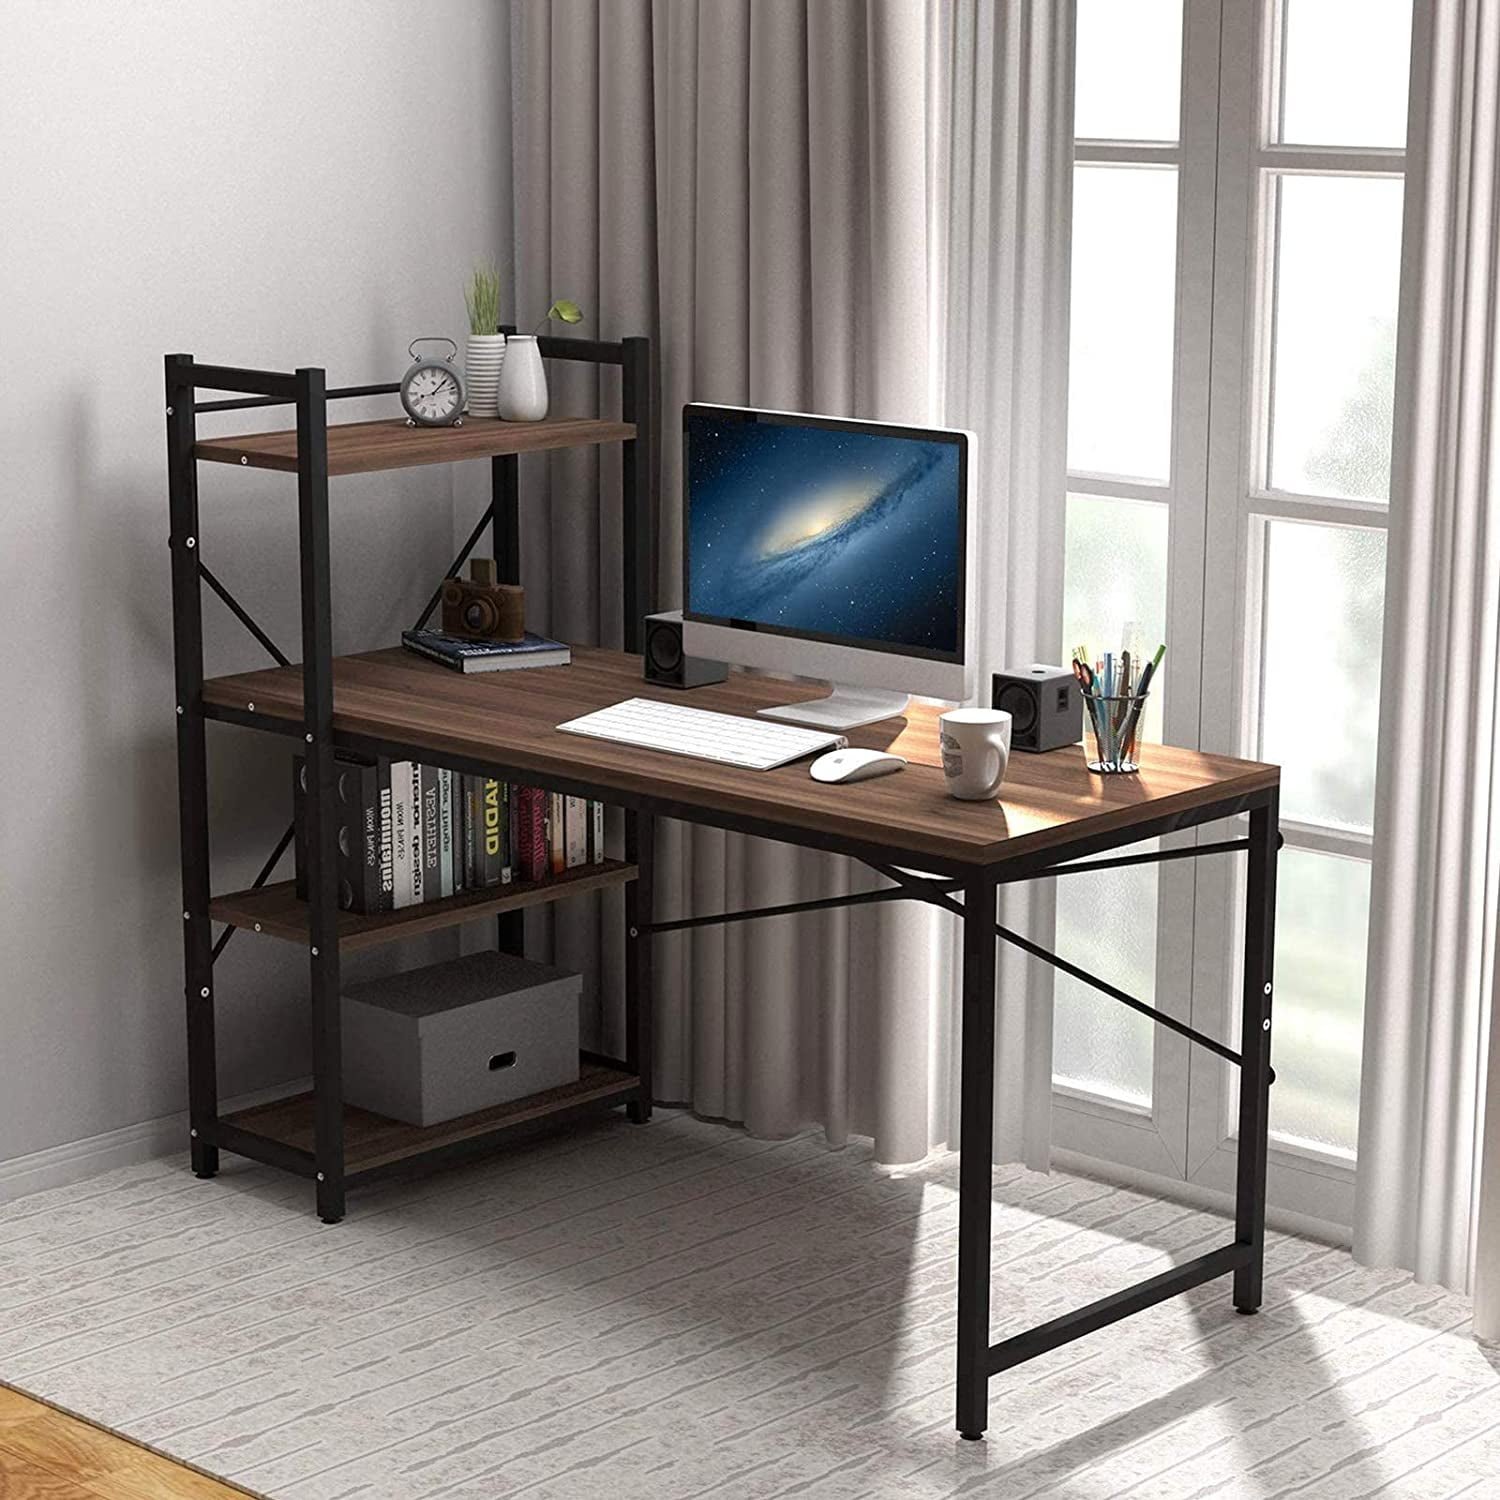 41.7 Student Study Table with Bookshelf Modern Wood Desk with Steel Frame for Small Spaces Home Office Workstation Walnut Computer Desk with 4 Tier Storage Shelves 